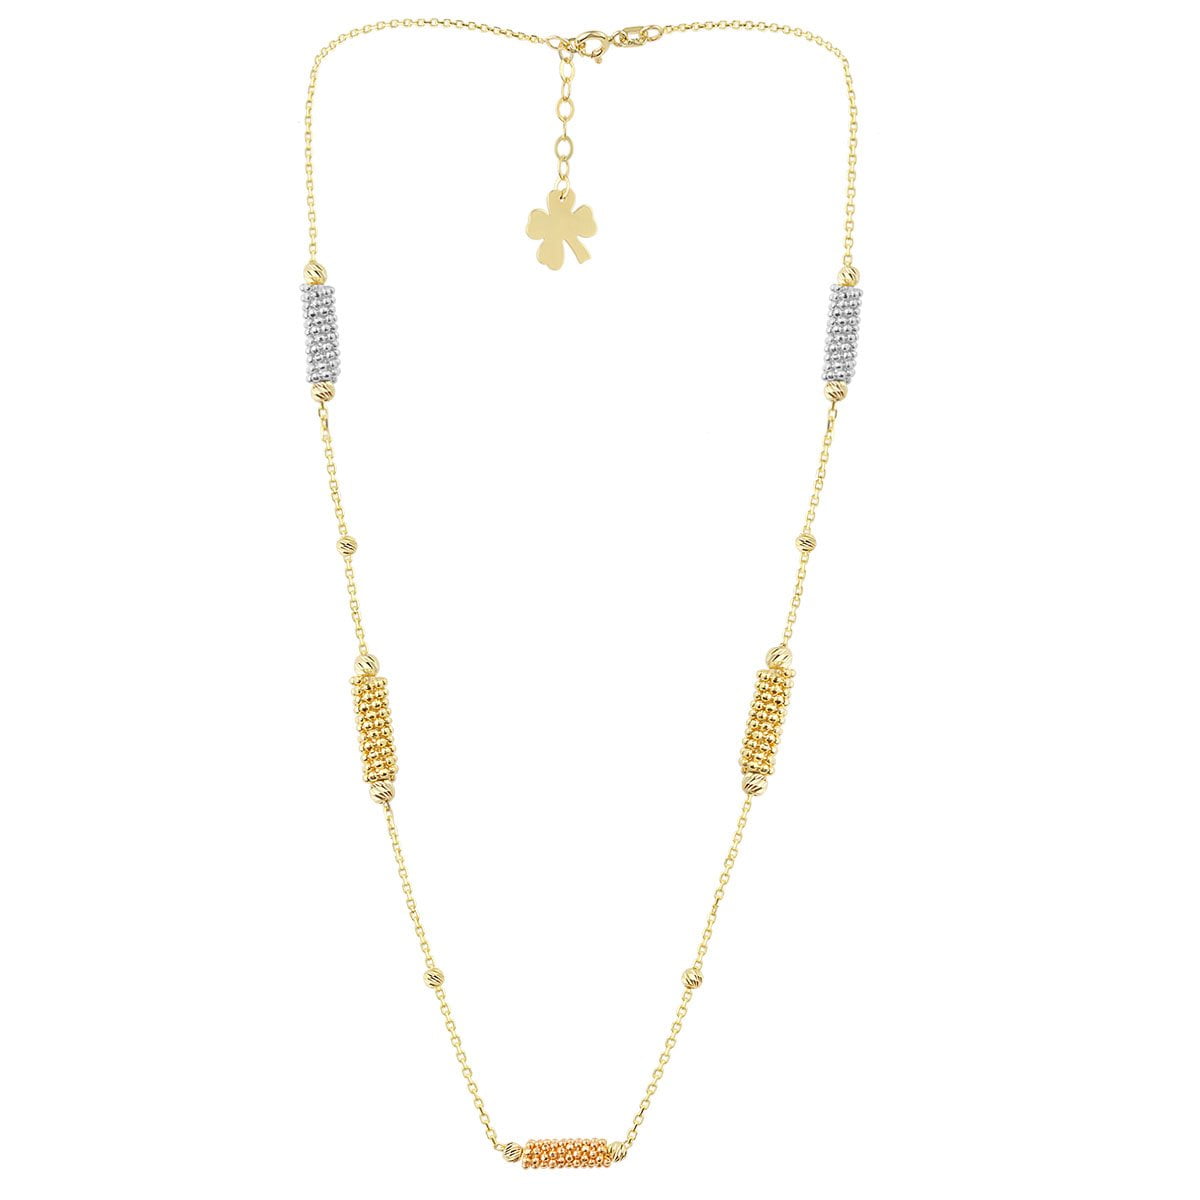 Cali Isla Cluster 18ct Gold Pendant Necklace